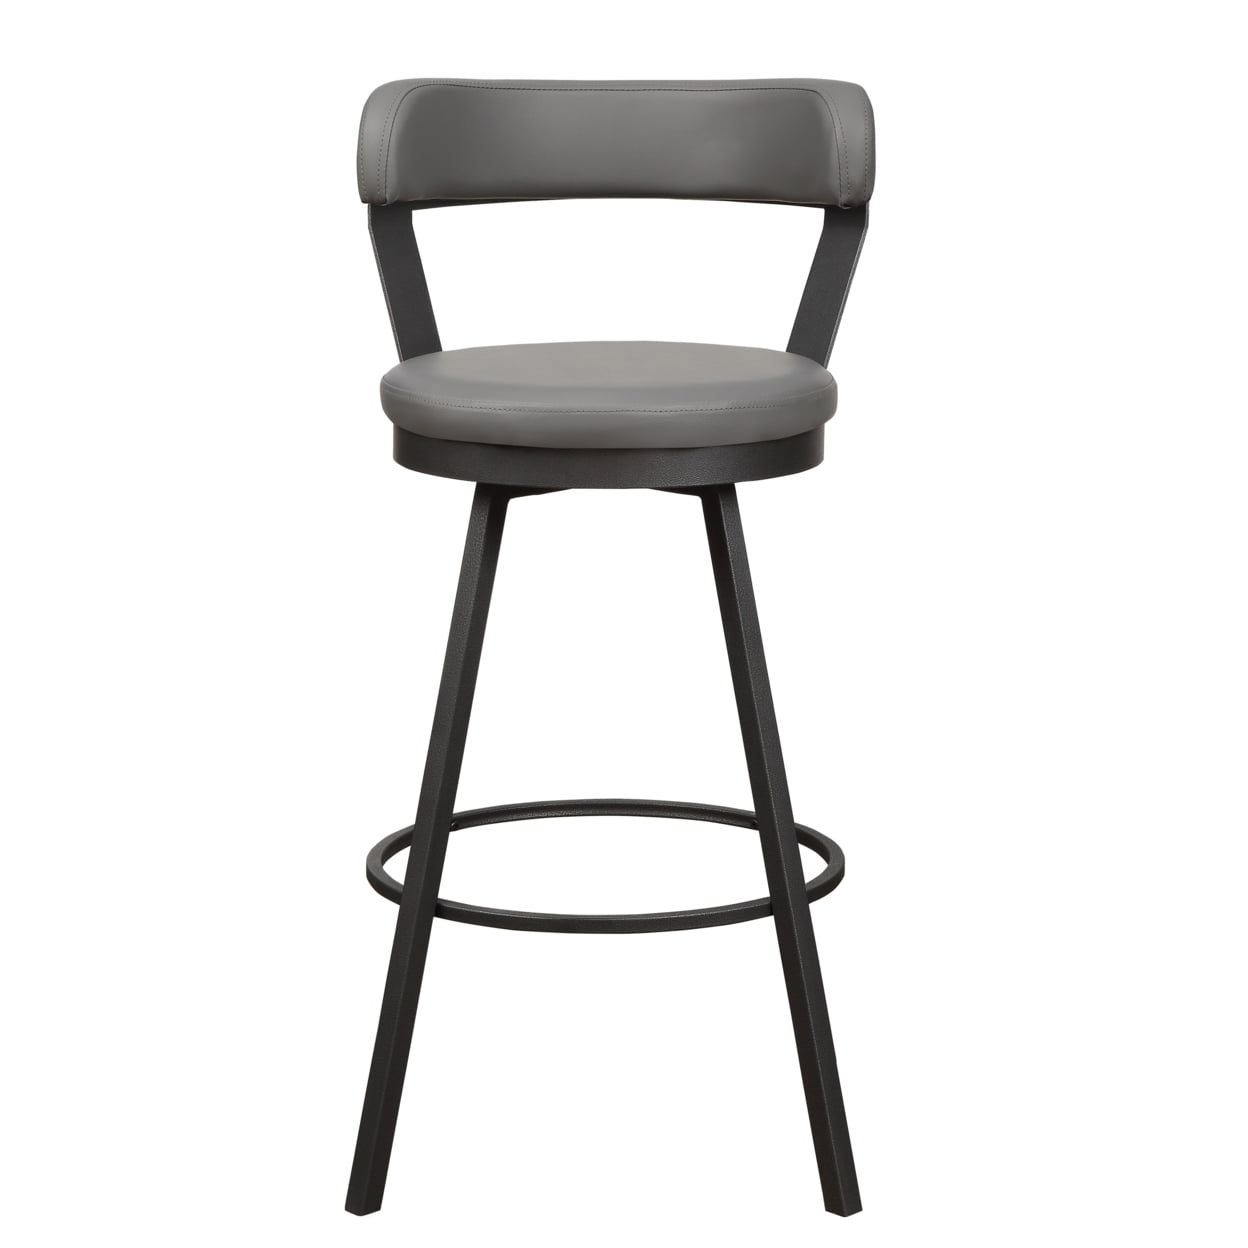 Picture of Benjara BM219936 Leatherette Pub Chair with Curved Design Open Backrest, Light Gray - Set of 2